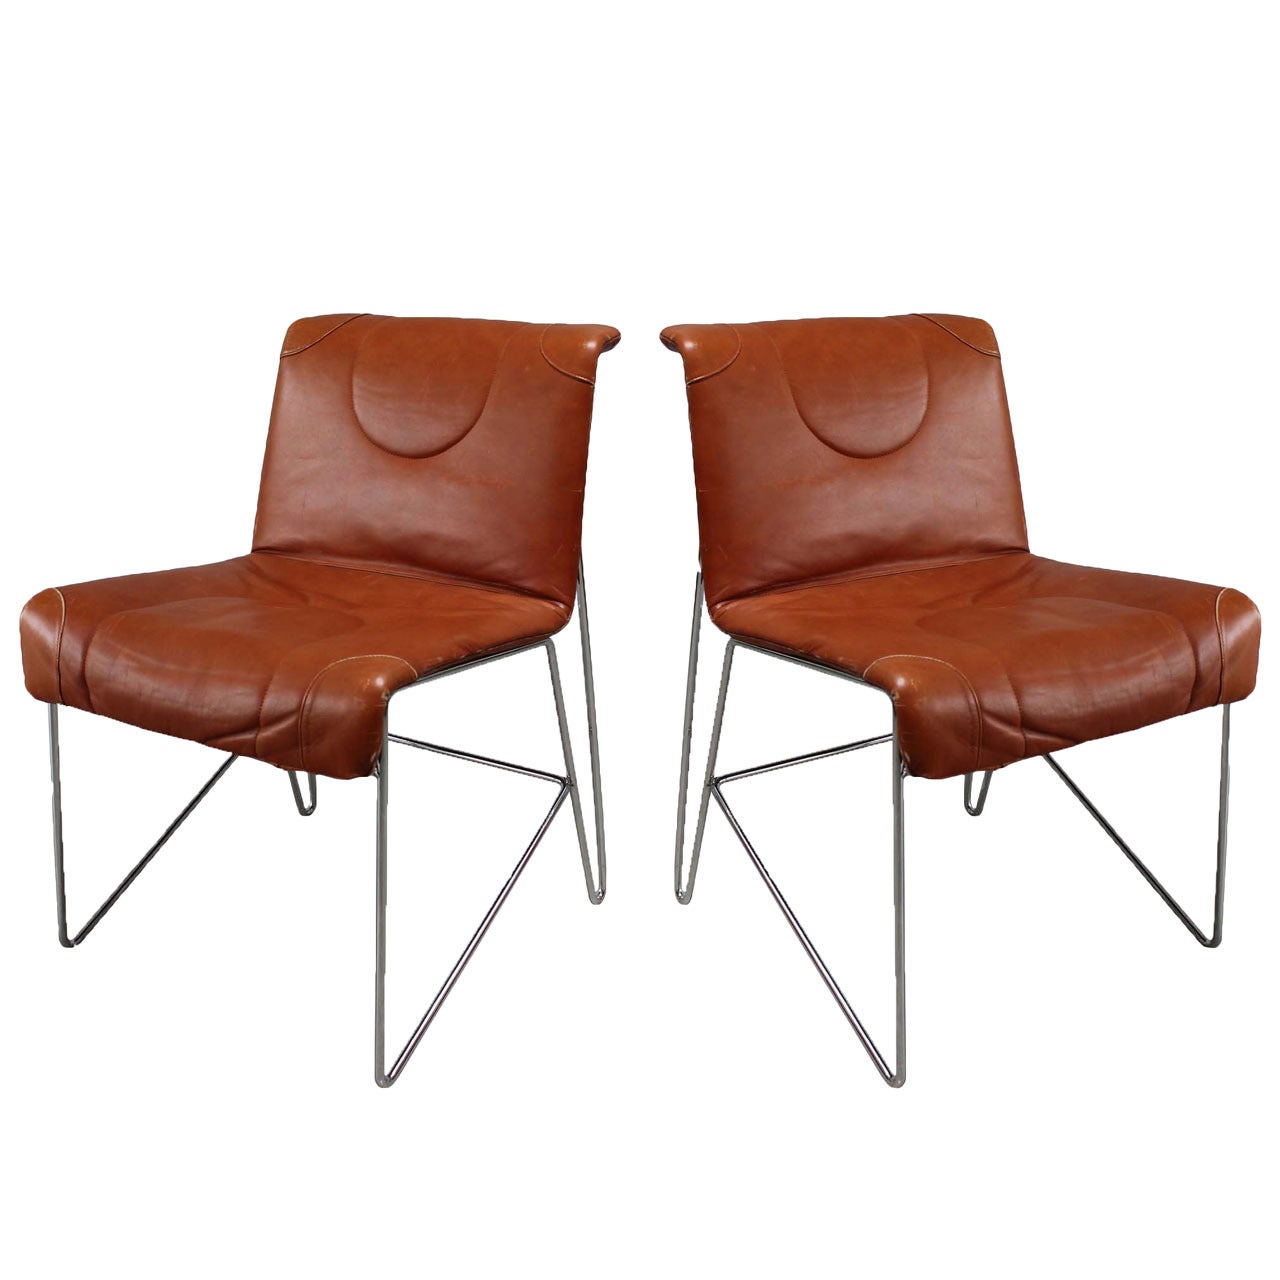 Pair of Panton Style Chairs